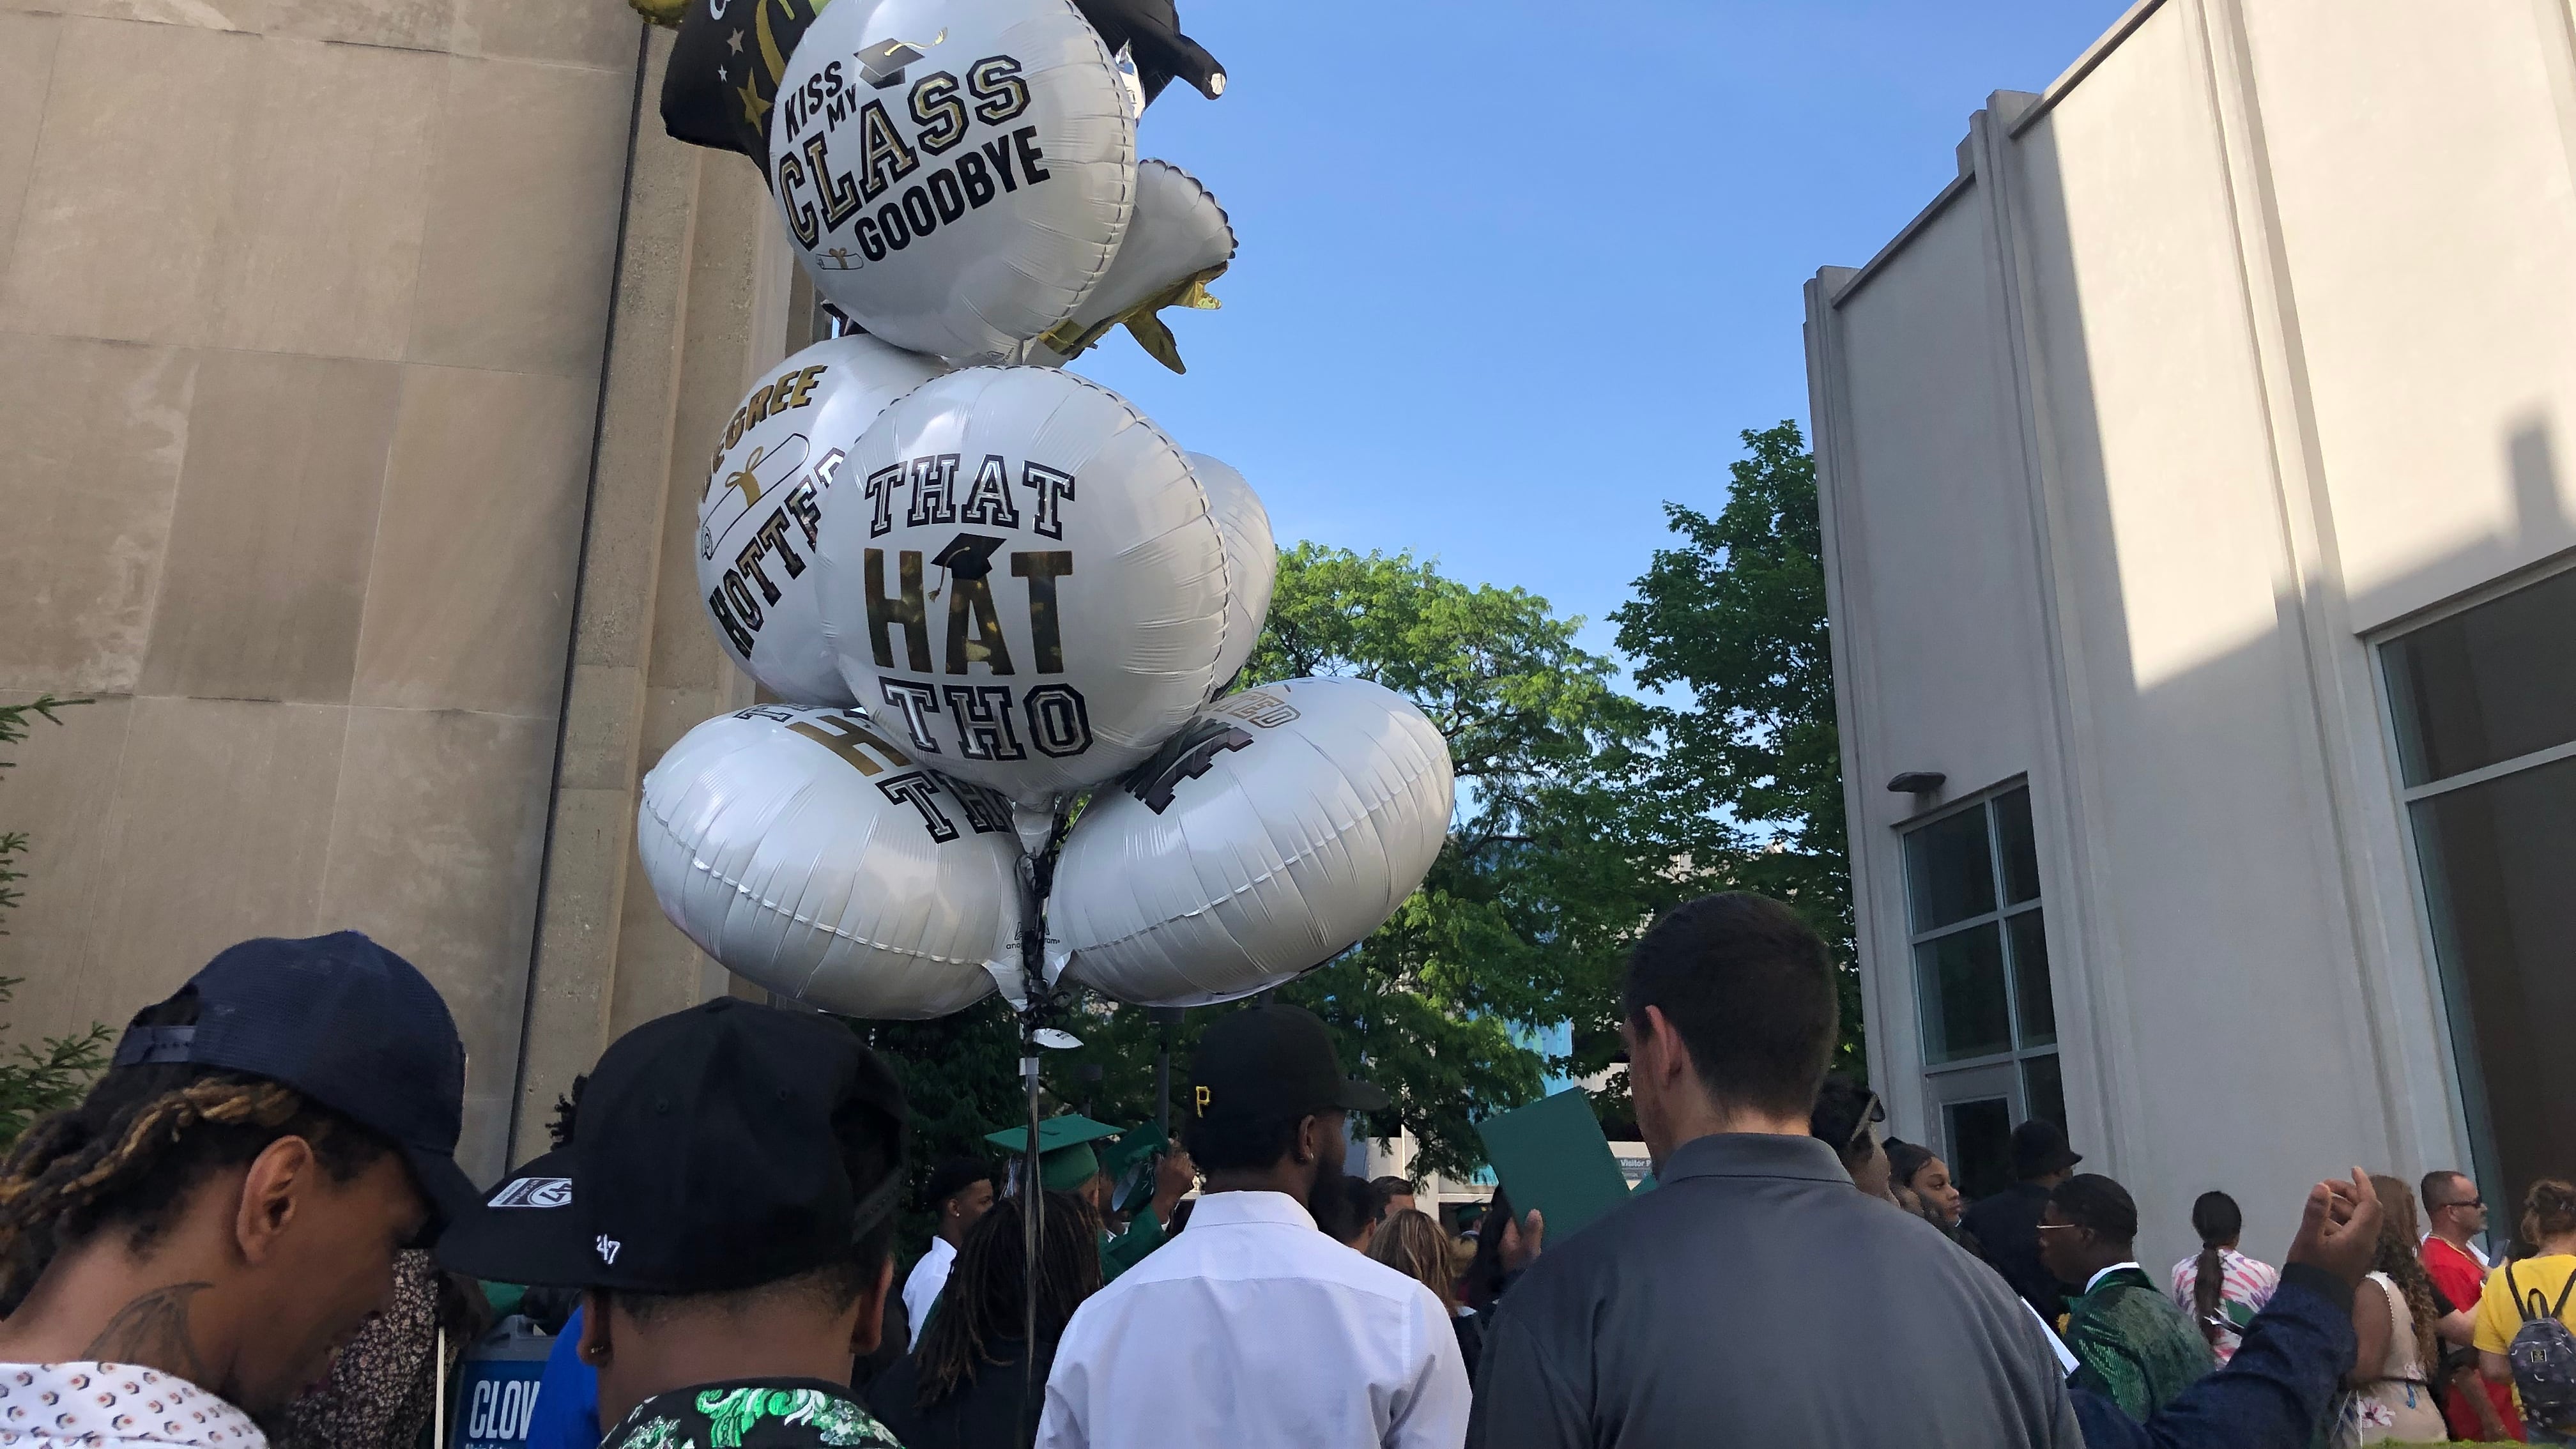 Family members of high school graduates hold celebratory balloons outside of a large memorial hall.